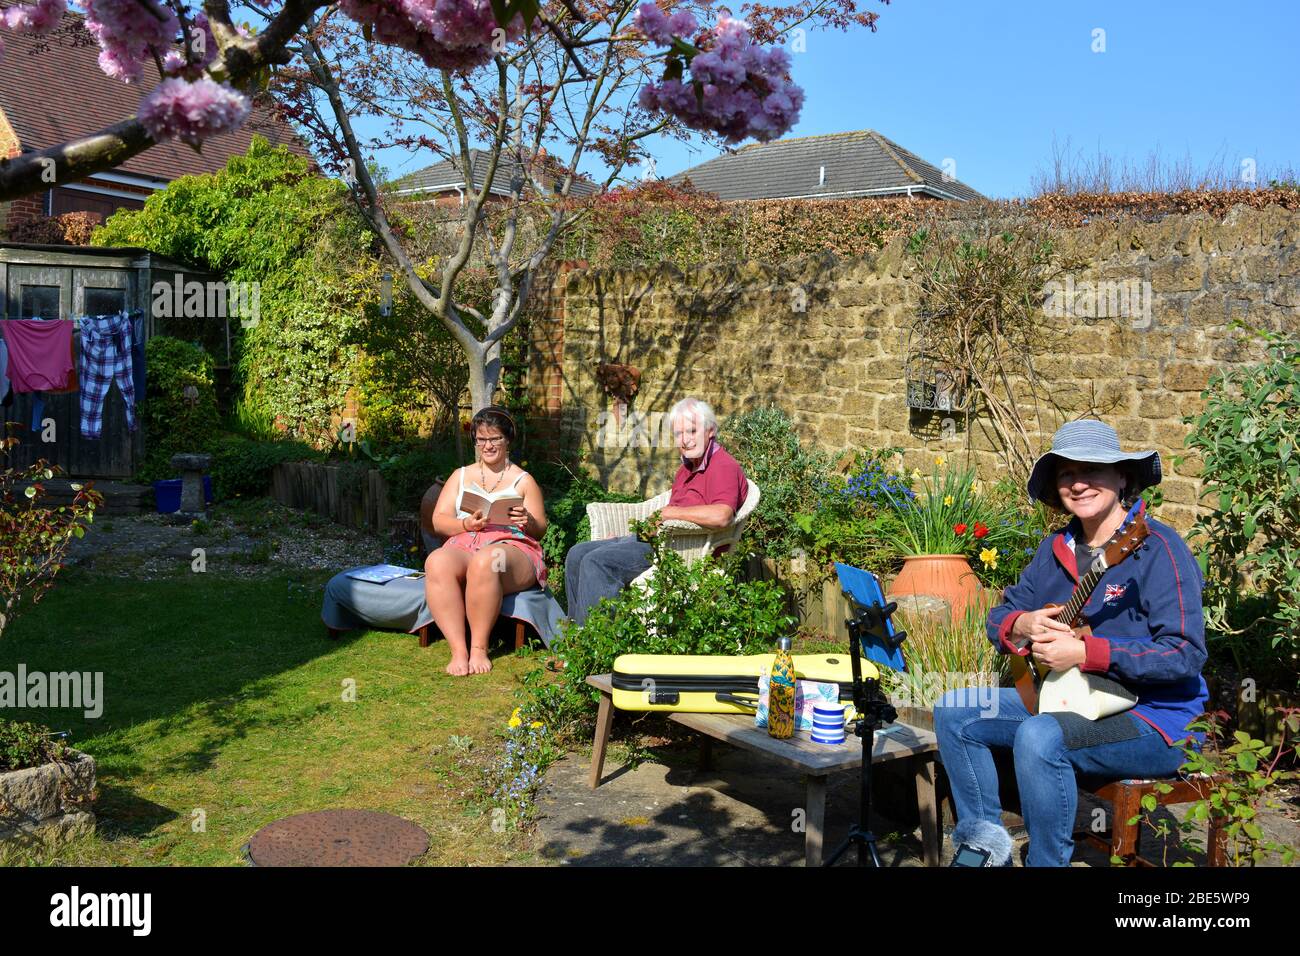 Family group enjoying the garden in the Springtime, Stay home, Stay safe, during the Covid-19 pandemic Stock Photo